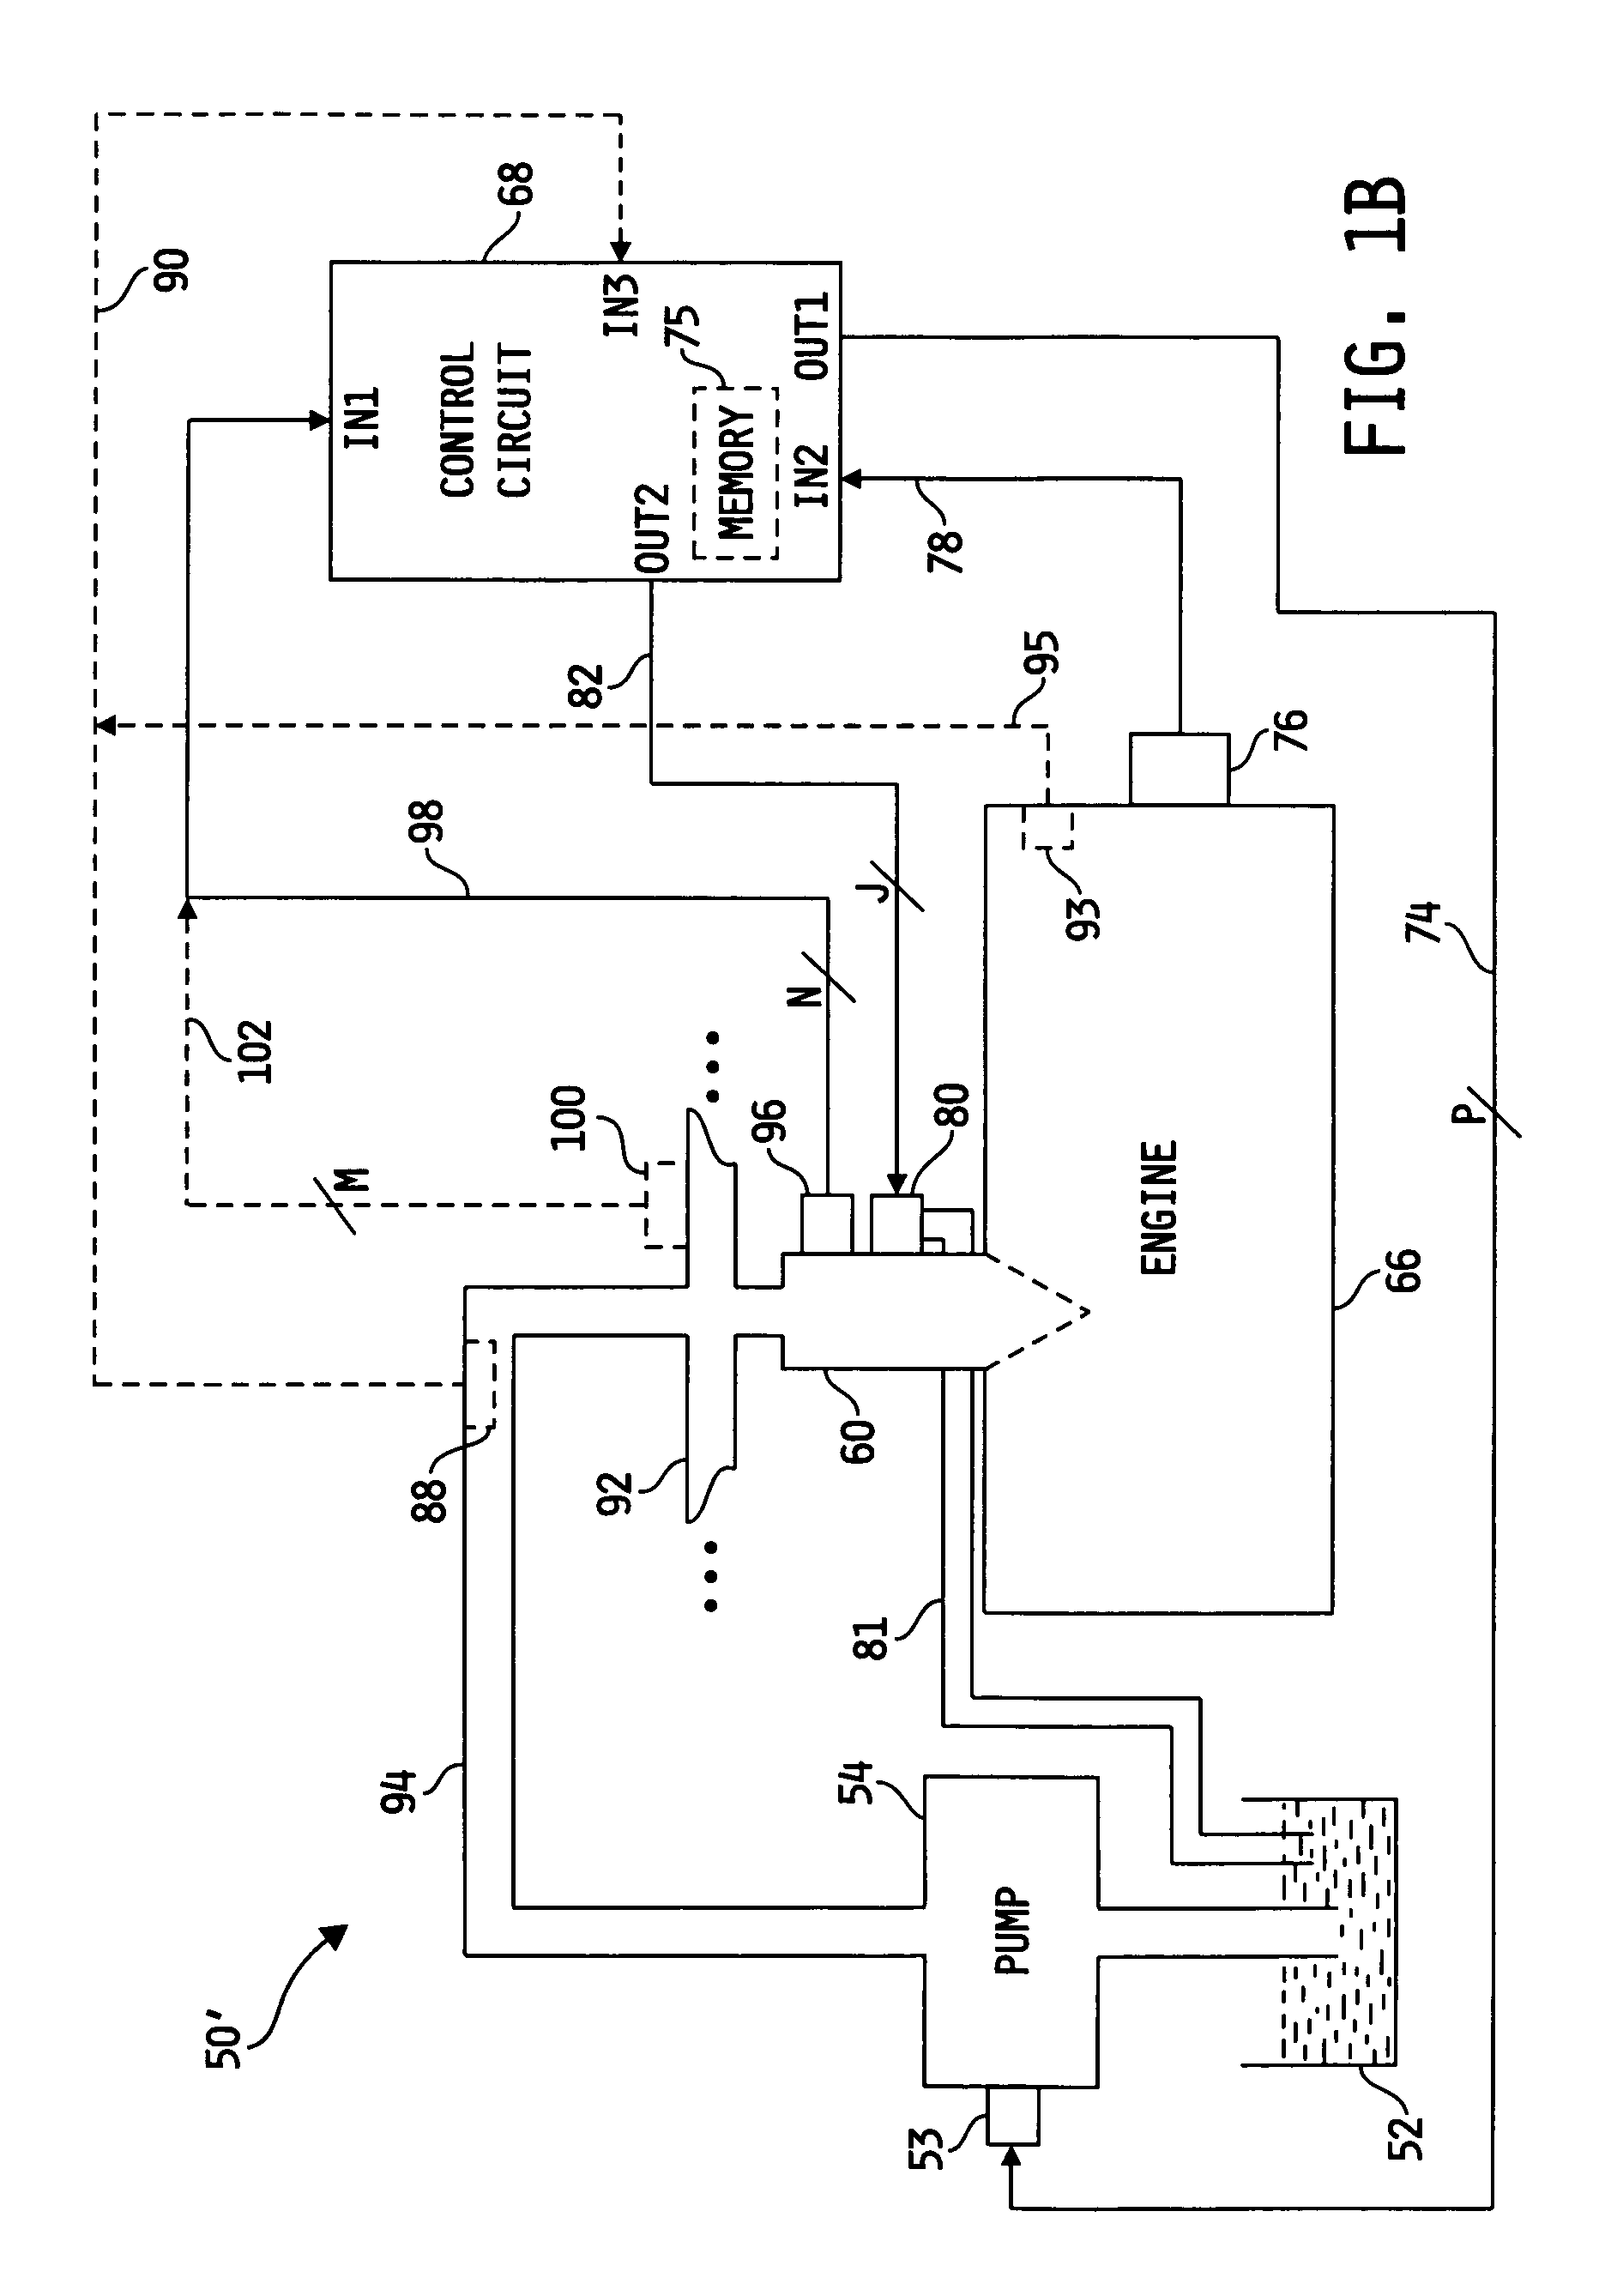 System for estimating a quantity of parasitic leakage from a fuel injection system